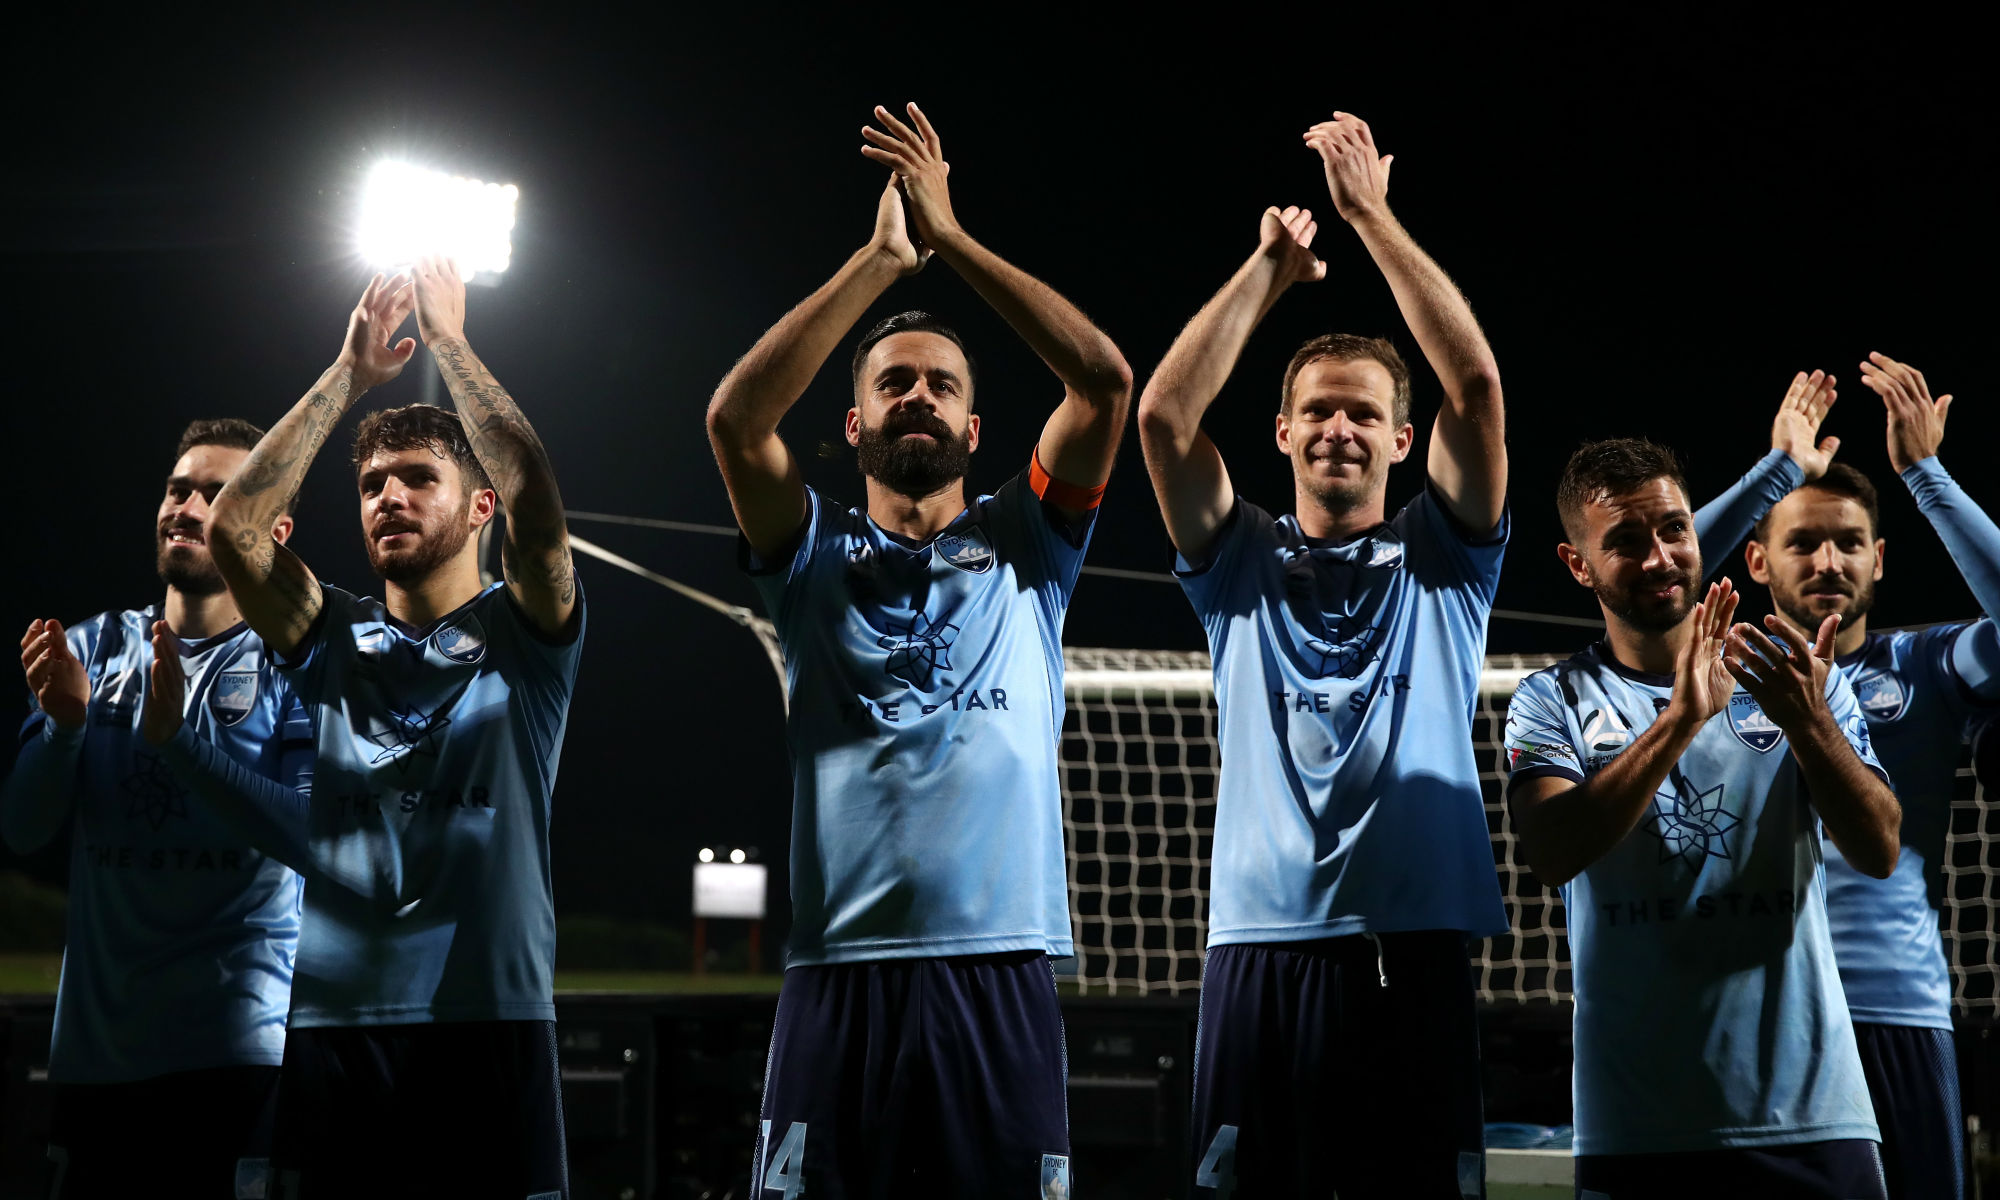 Sydney FC players celebrate their 6-1 Semi-Final win against Melbourne Victory at Netstrata Jubilee Stadium.